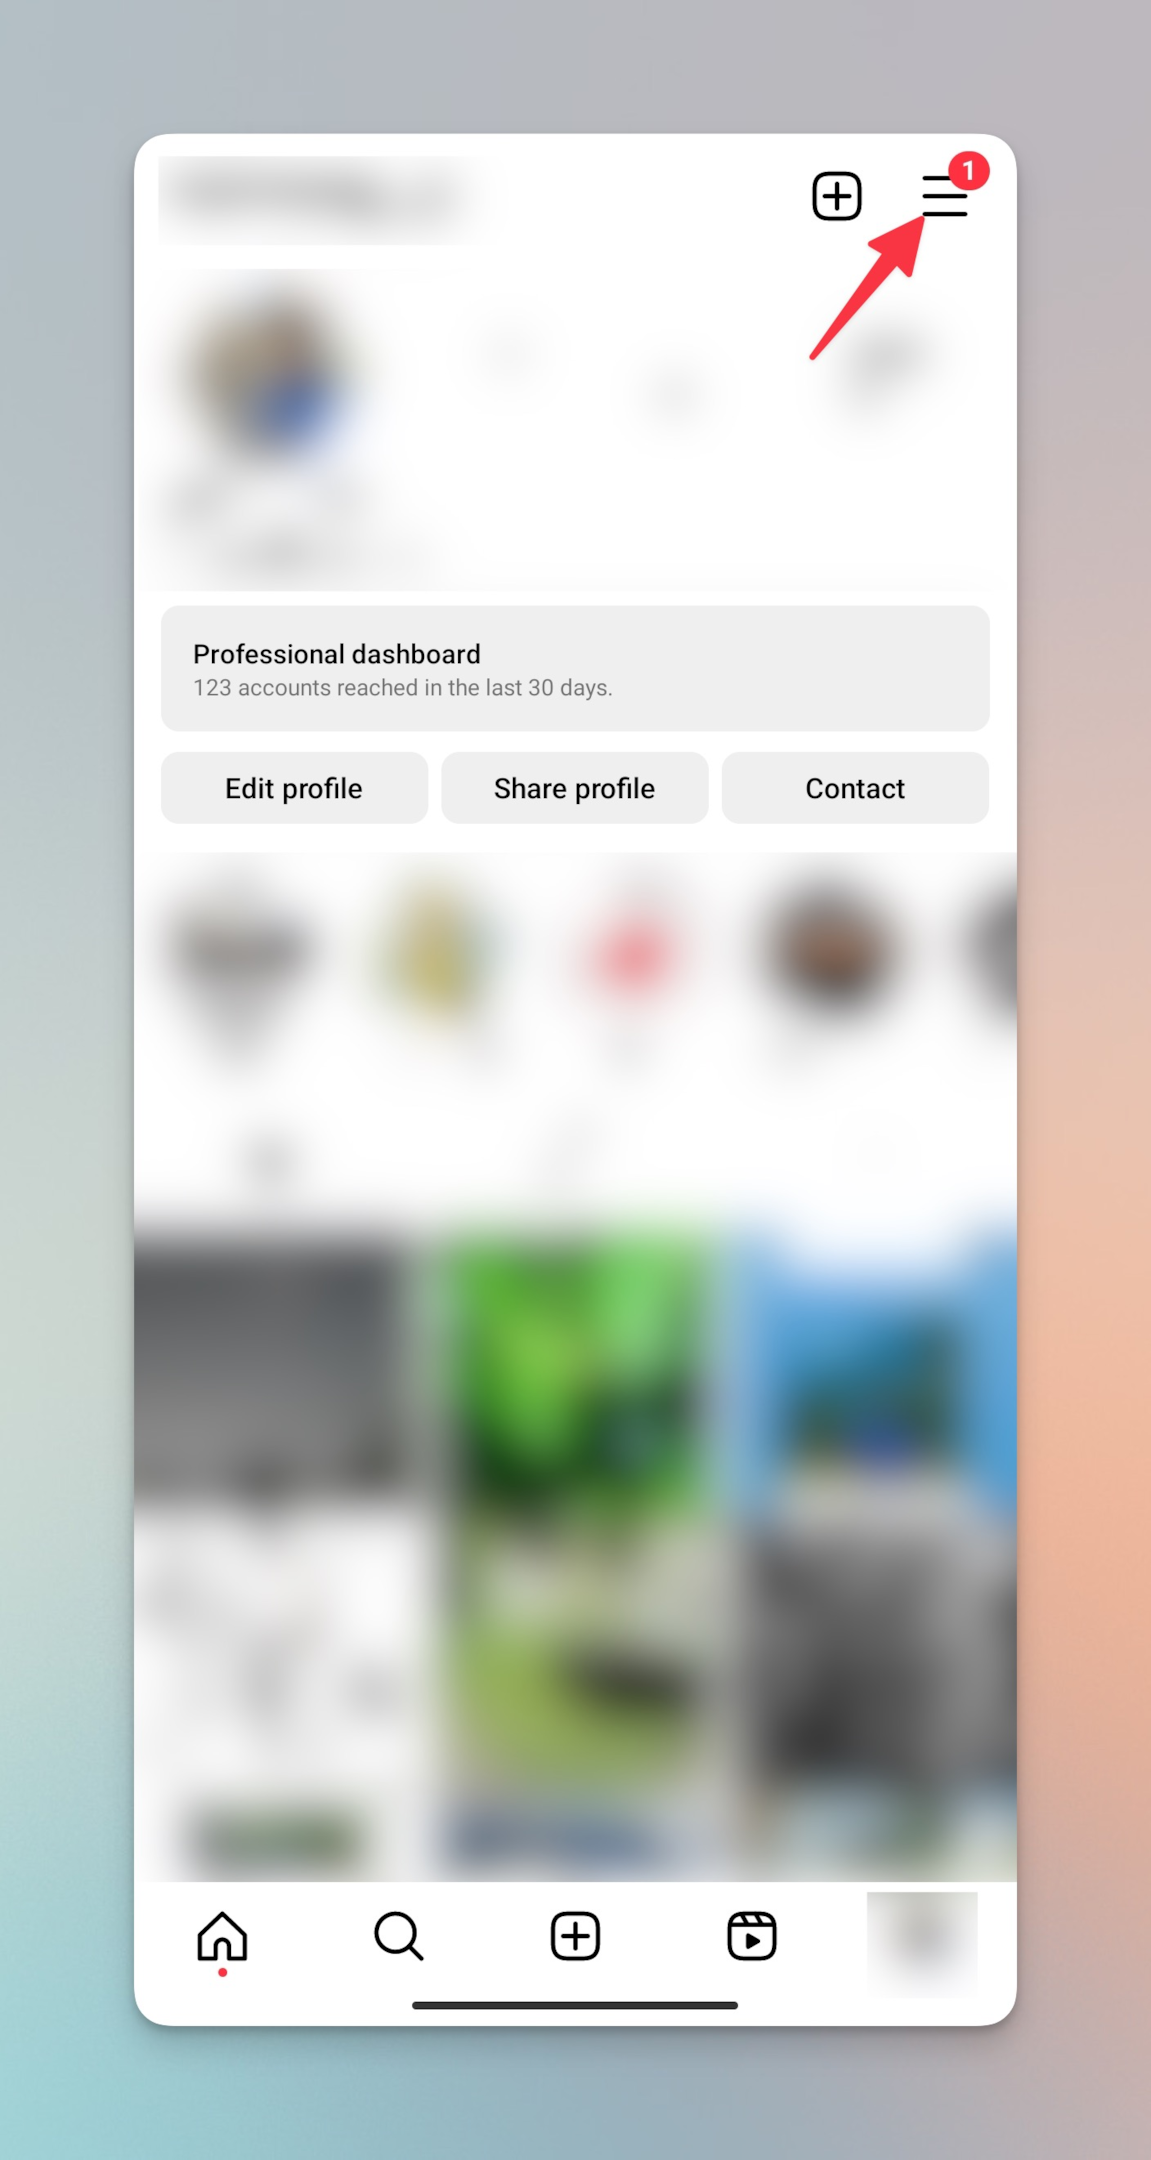 Remote.tools is pointing to hamburger menu on Instagram profile to switch to private mode on Instagram